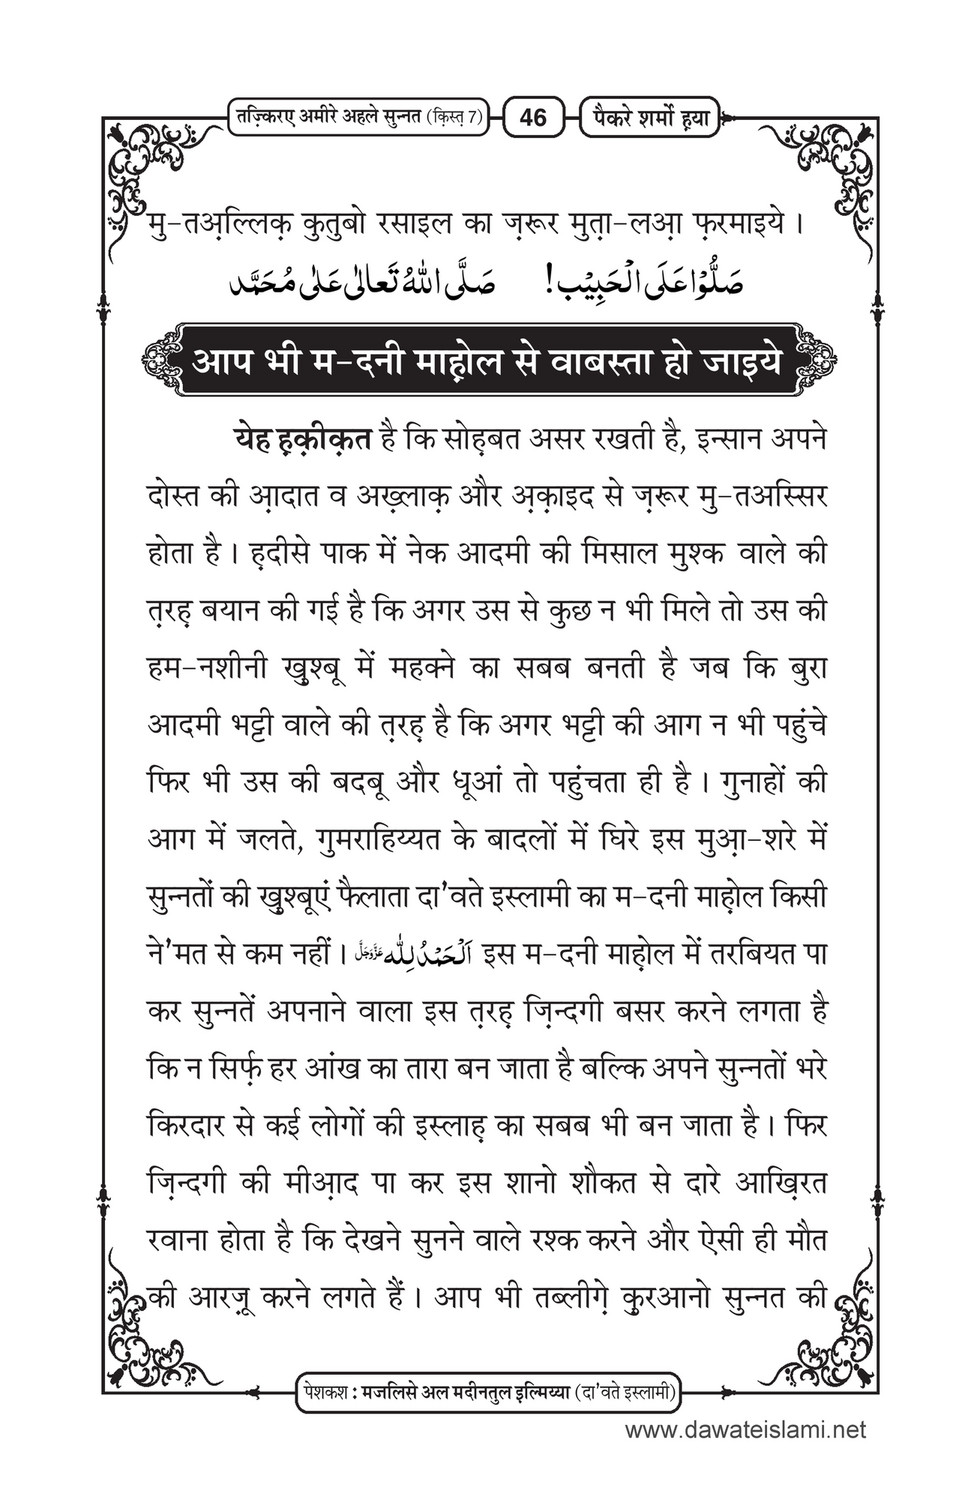 My Publications Paikar E Sharm O Haya Ep 7 In Hindi Page 46 47 Created With Publitas Com